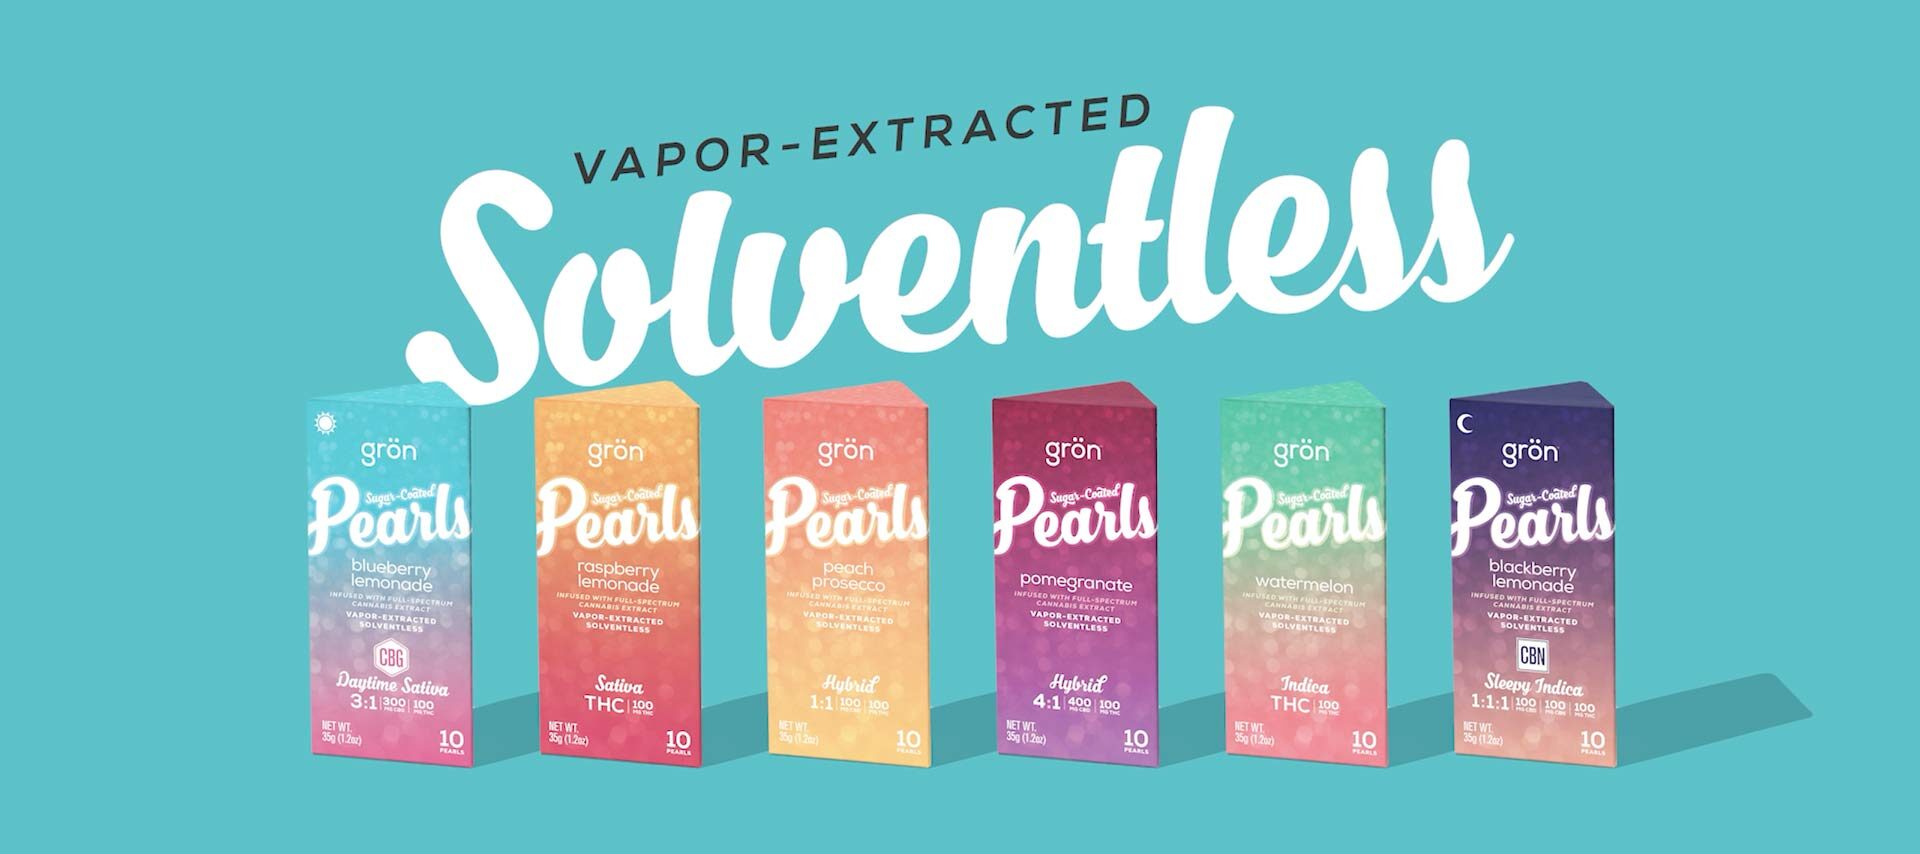 Grön Launches Vapor-Extracted Solventless Edibles